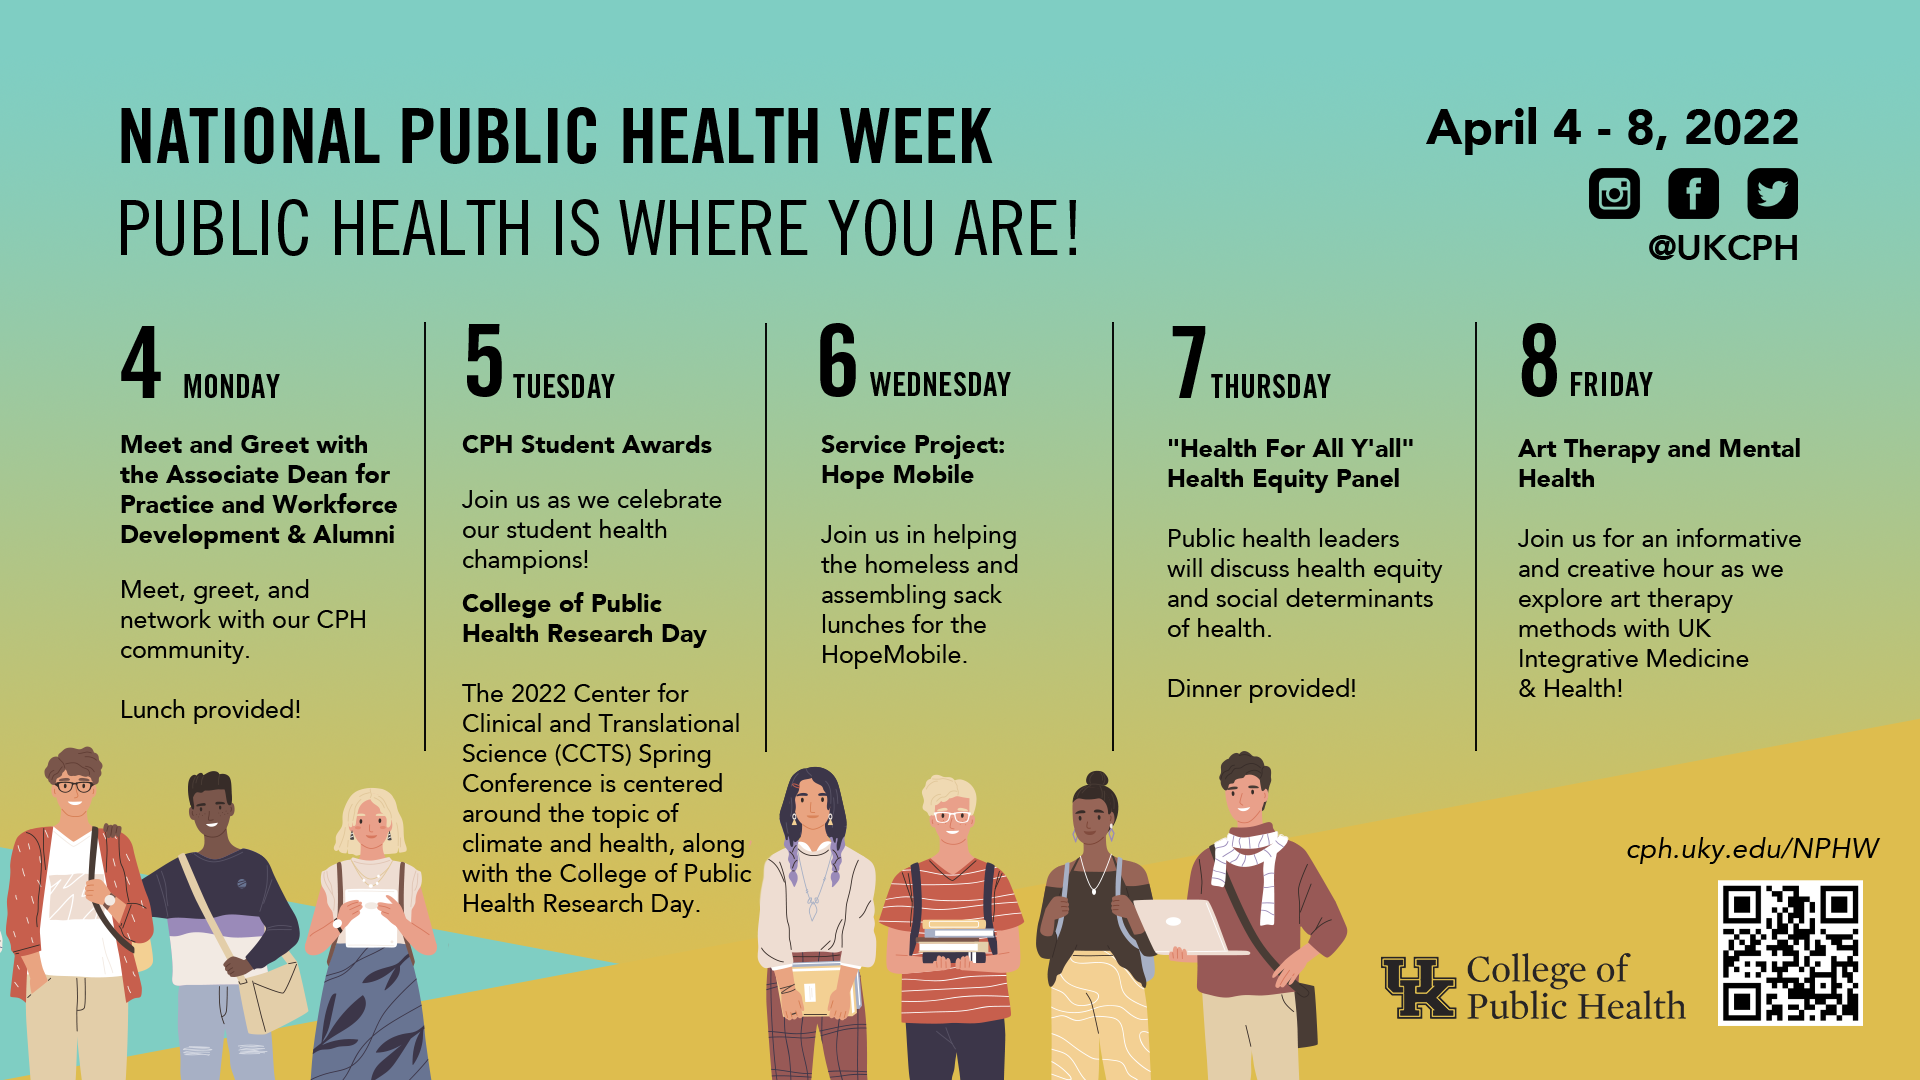 Get Ready for "National Public Health Week" Starting April 4! College of Public Health